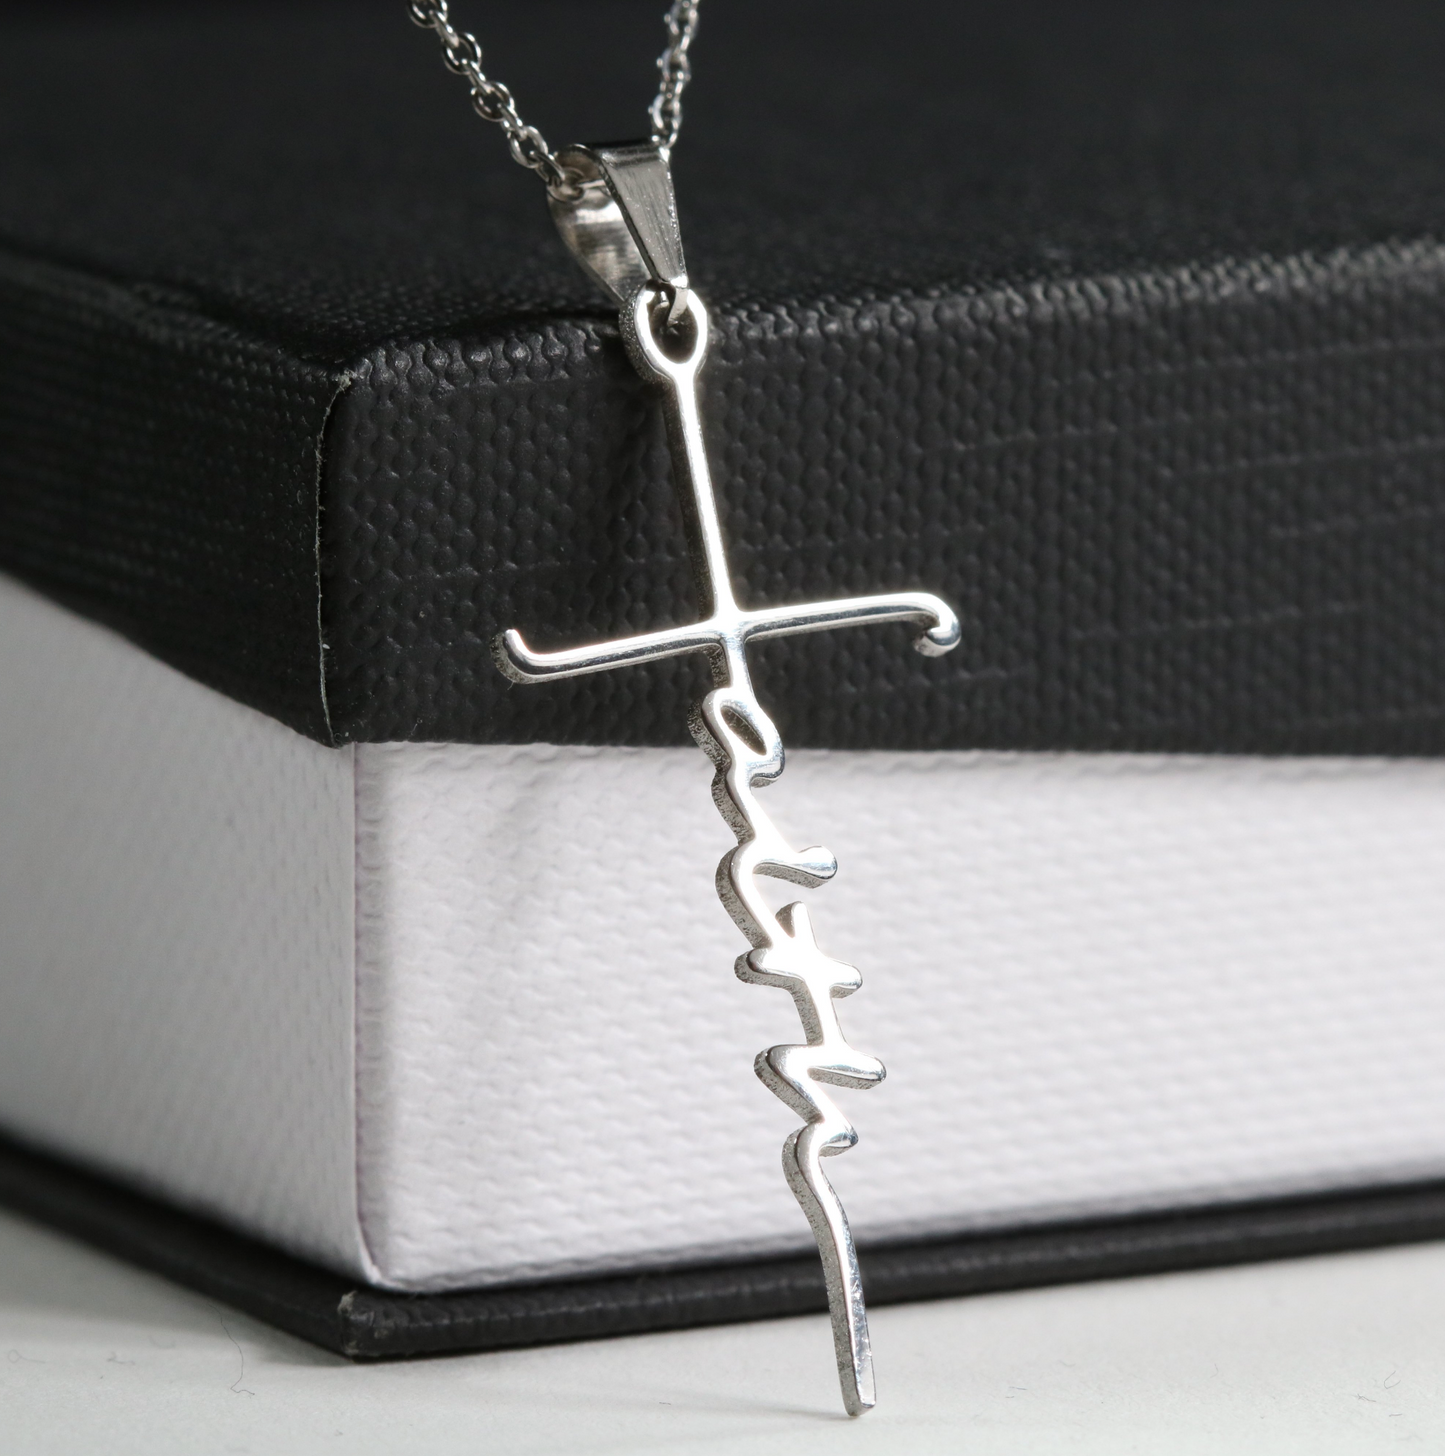 THE GIFT OF FAITH FOR THE GRADUATE DAUGHTER